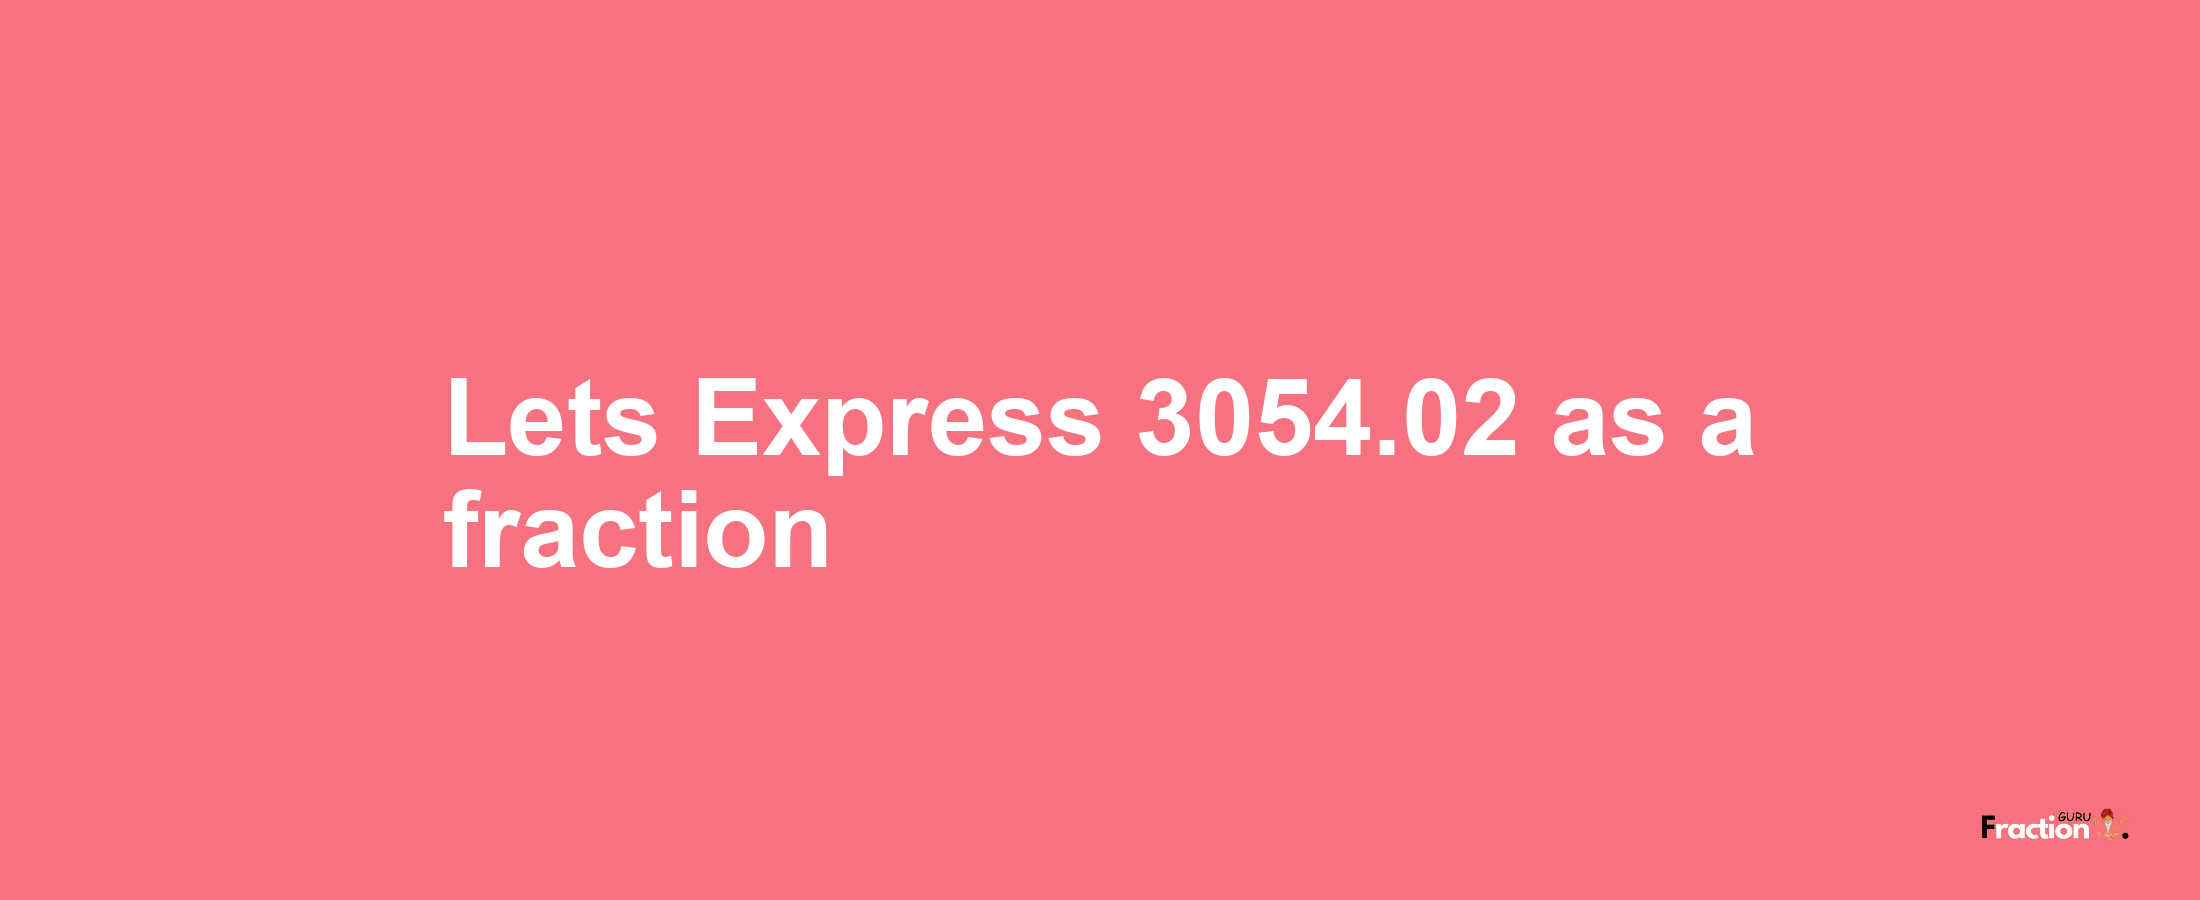 Lets Express 3054.02 as afraction